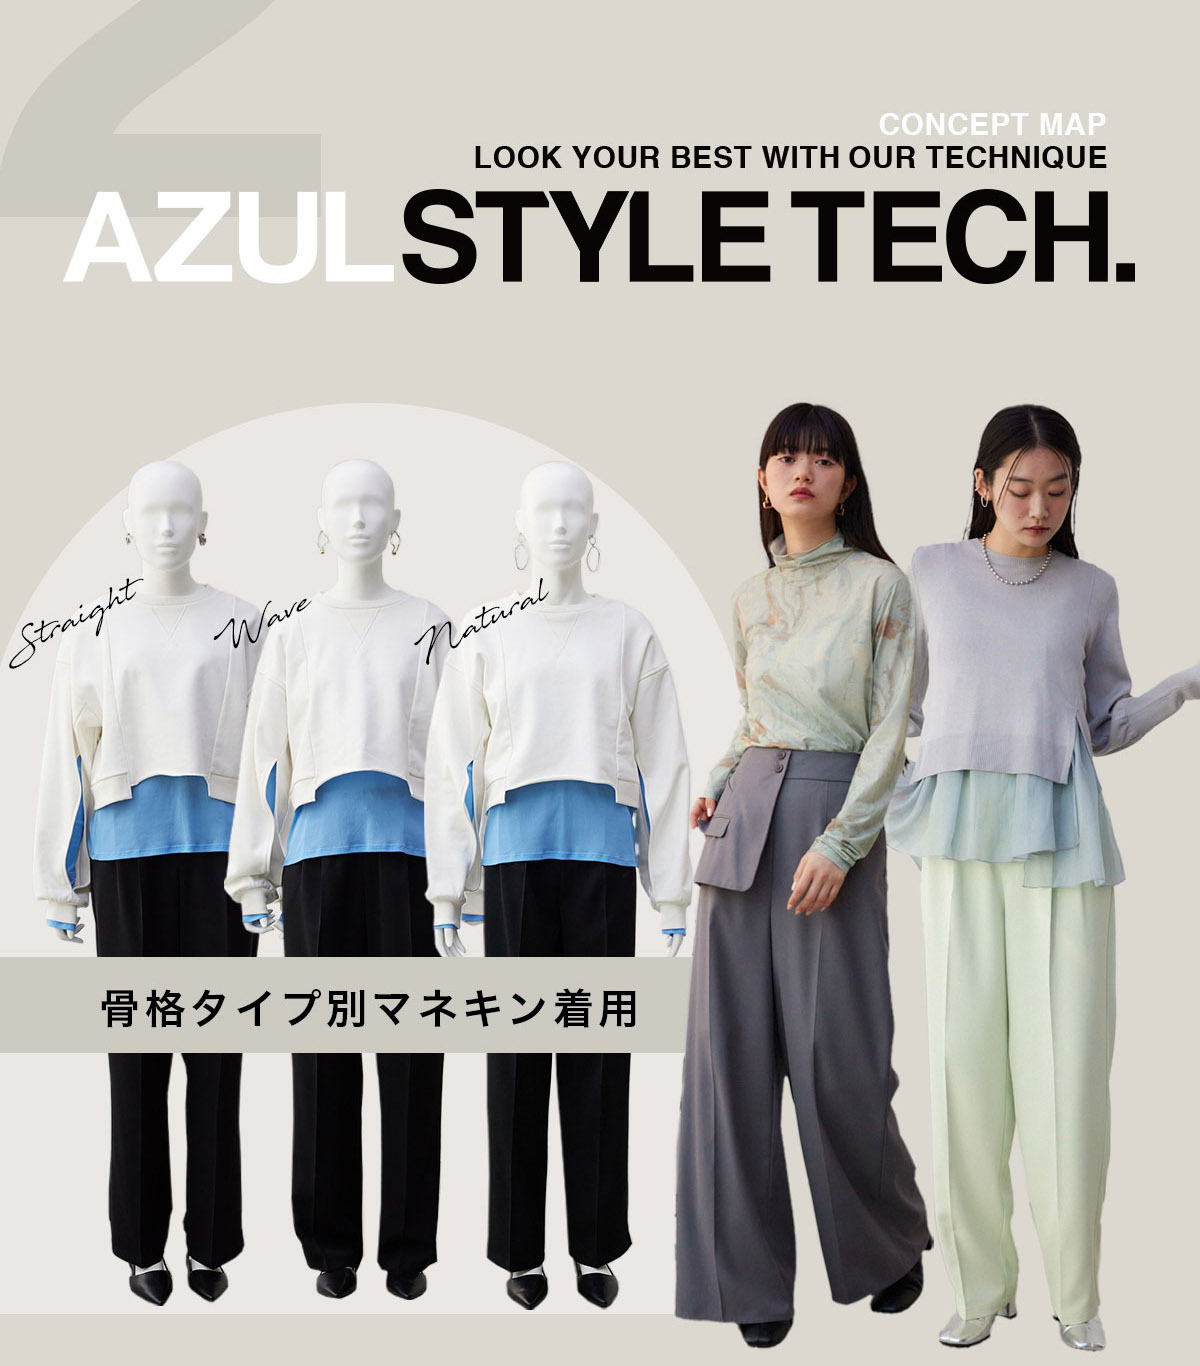 LOOK YOUR BEST WITH OUR TECHNIQUE AZUL STYLE TECH．2 for WOMEN